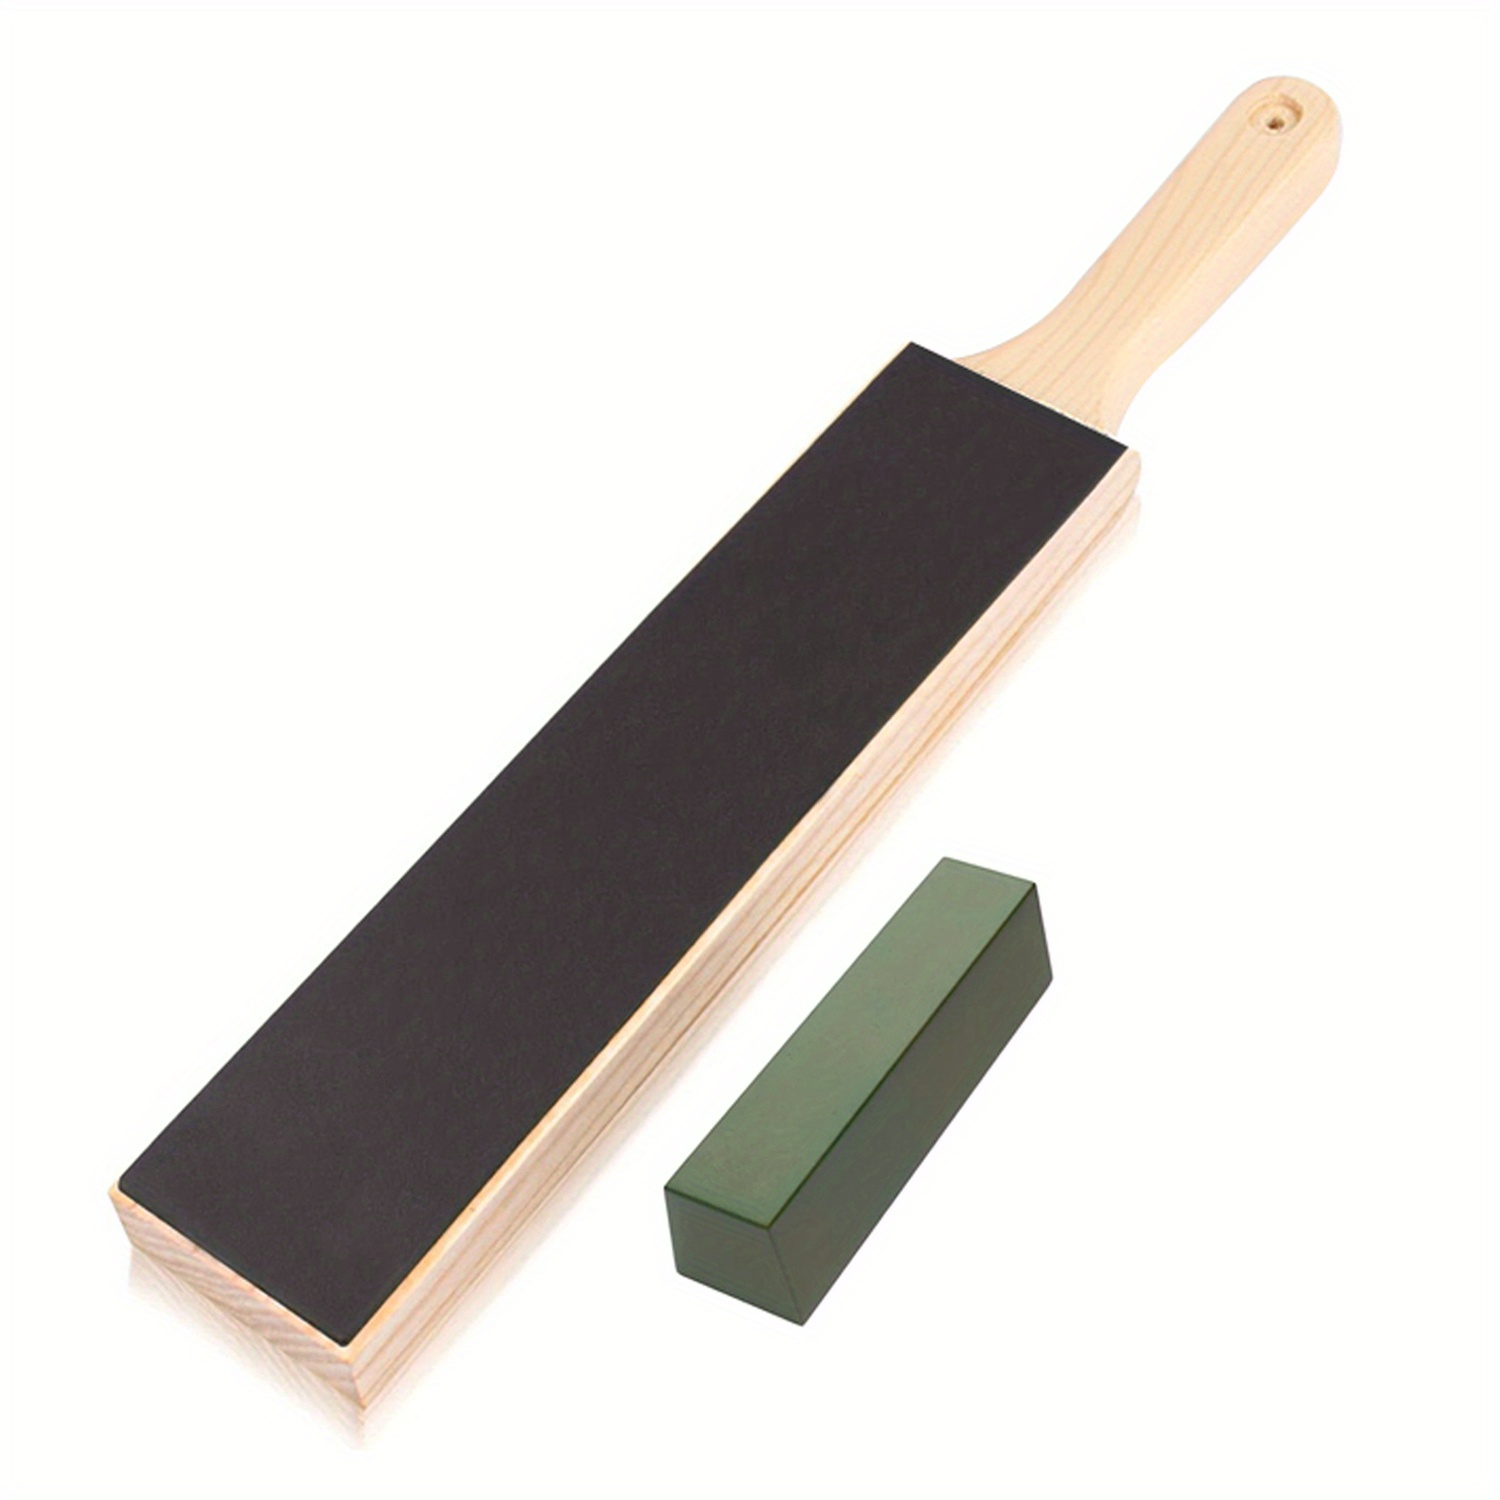 Get All Knives and Chisels Razor Sharp with Leather Strop